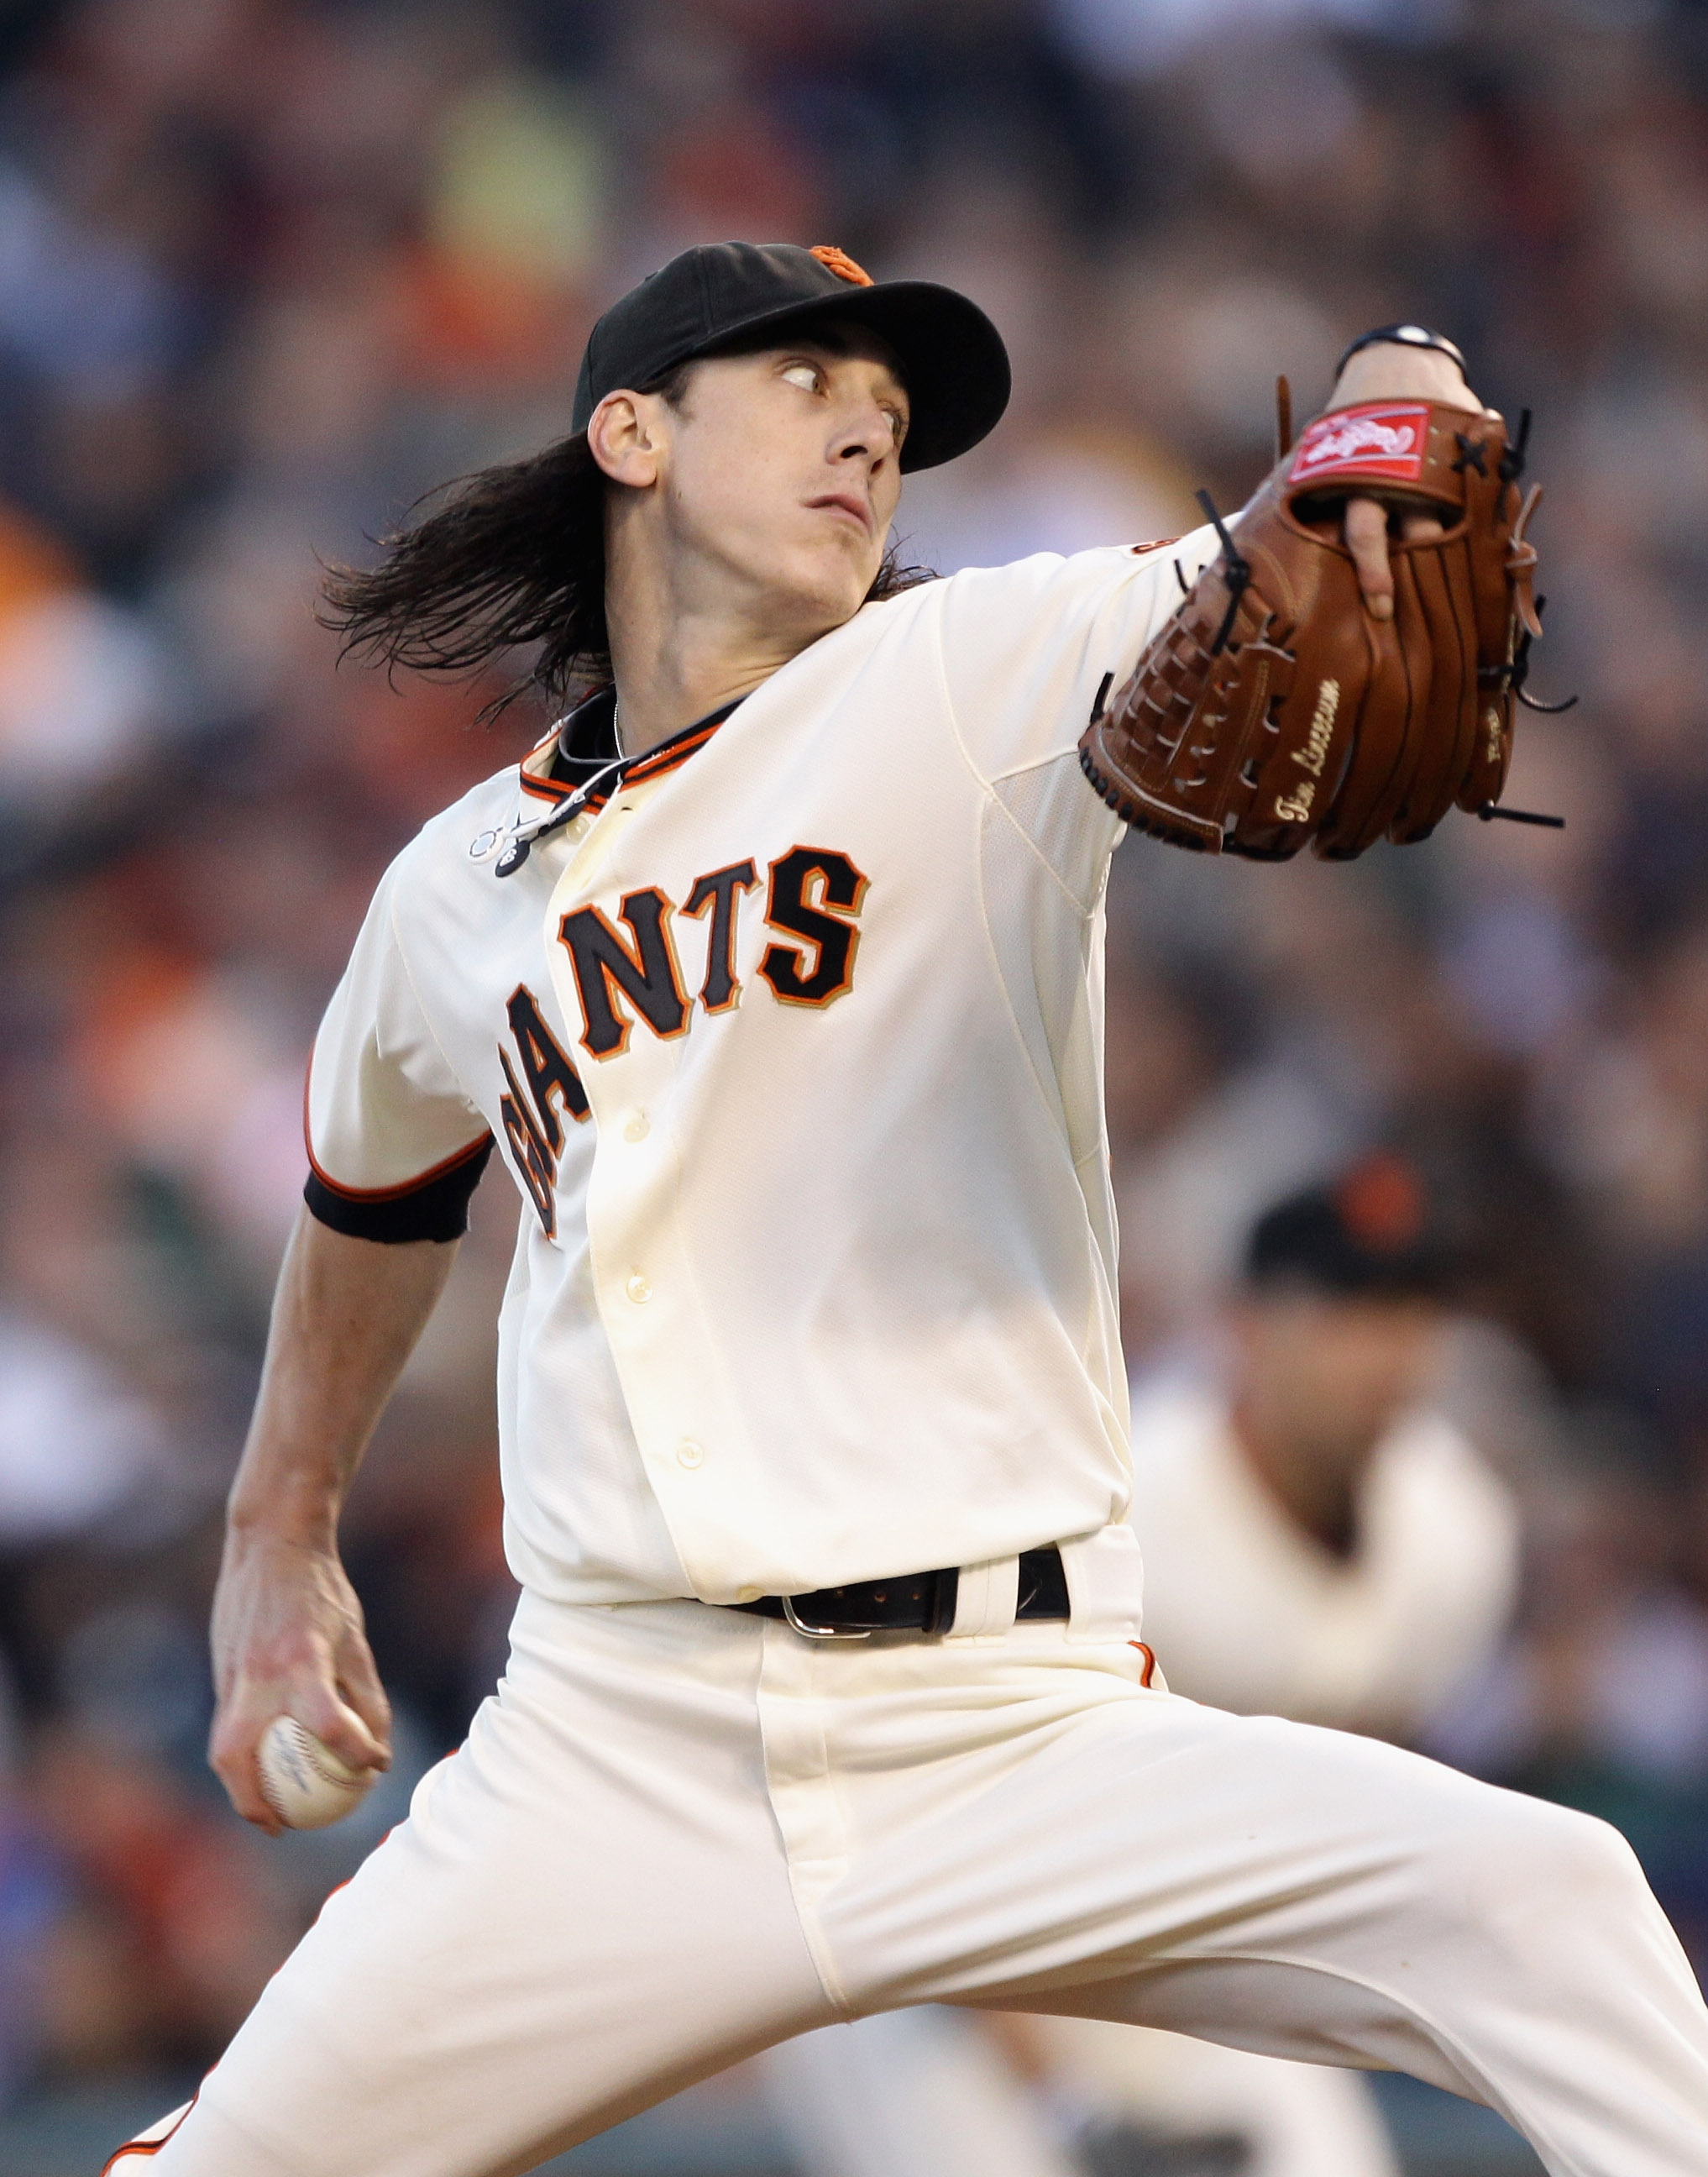 SAN FRANCISCO - JULY 15:  Tim Lincecum #55 of the San Francisco Giants pitches against the New York Mets in the second inning at AT&T Park on July 15, 2010 in San Francisco, California.  (Photo by Ezra Shaw/Getty Images)